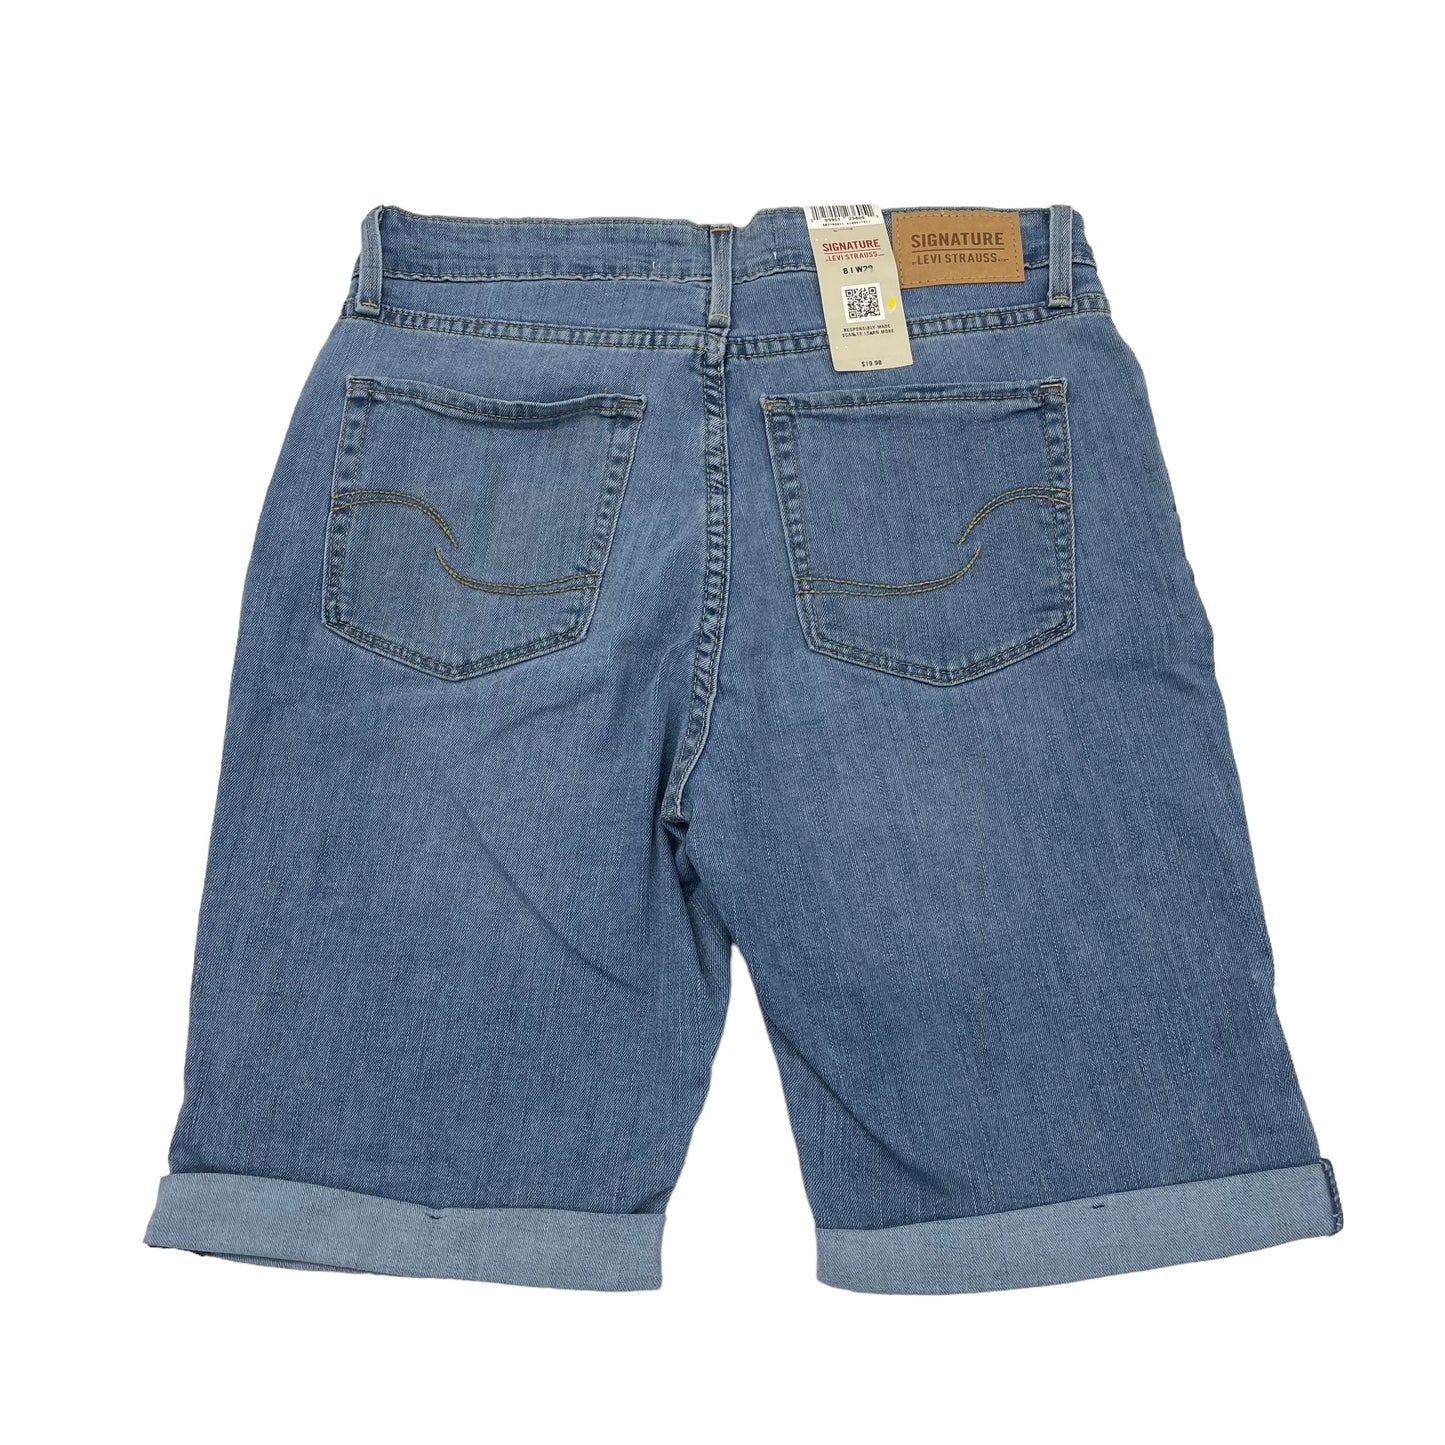 Shorts By Levis  Size: 8